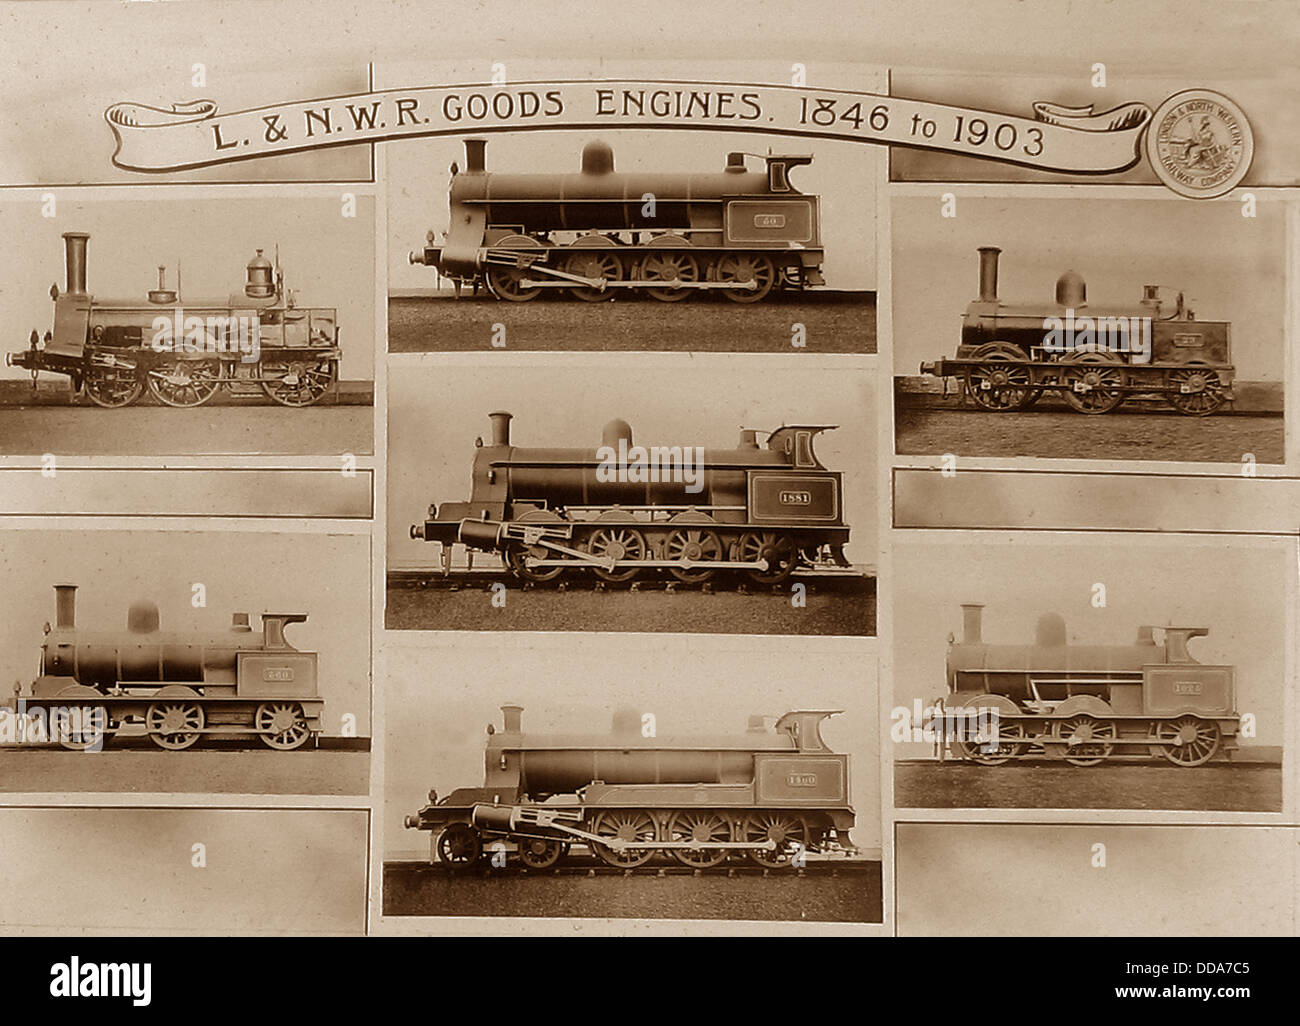 LNWR Goods engines 1846 to 1903 Stock Photo